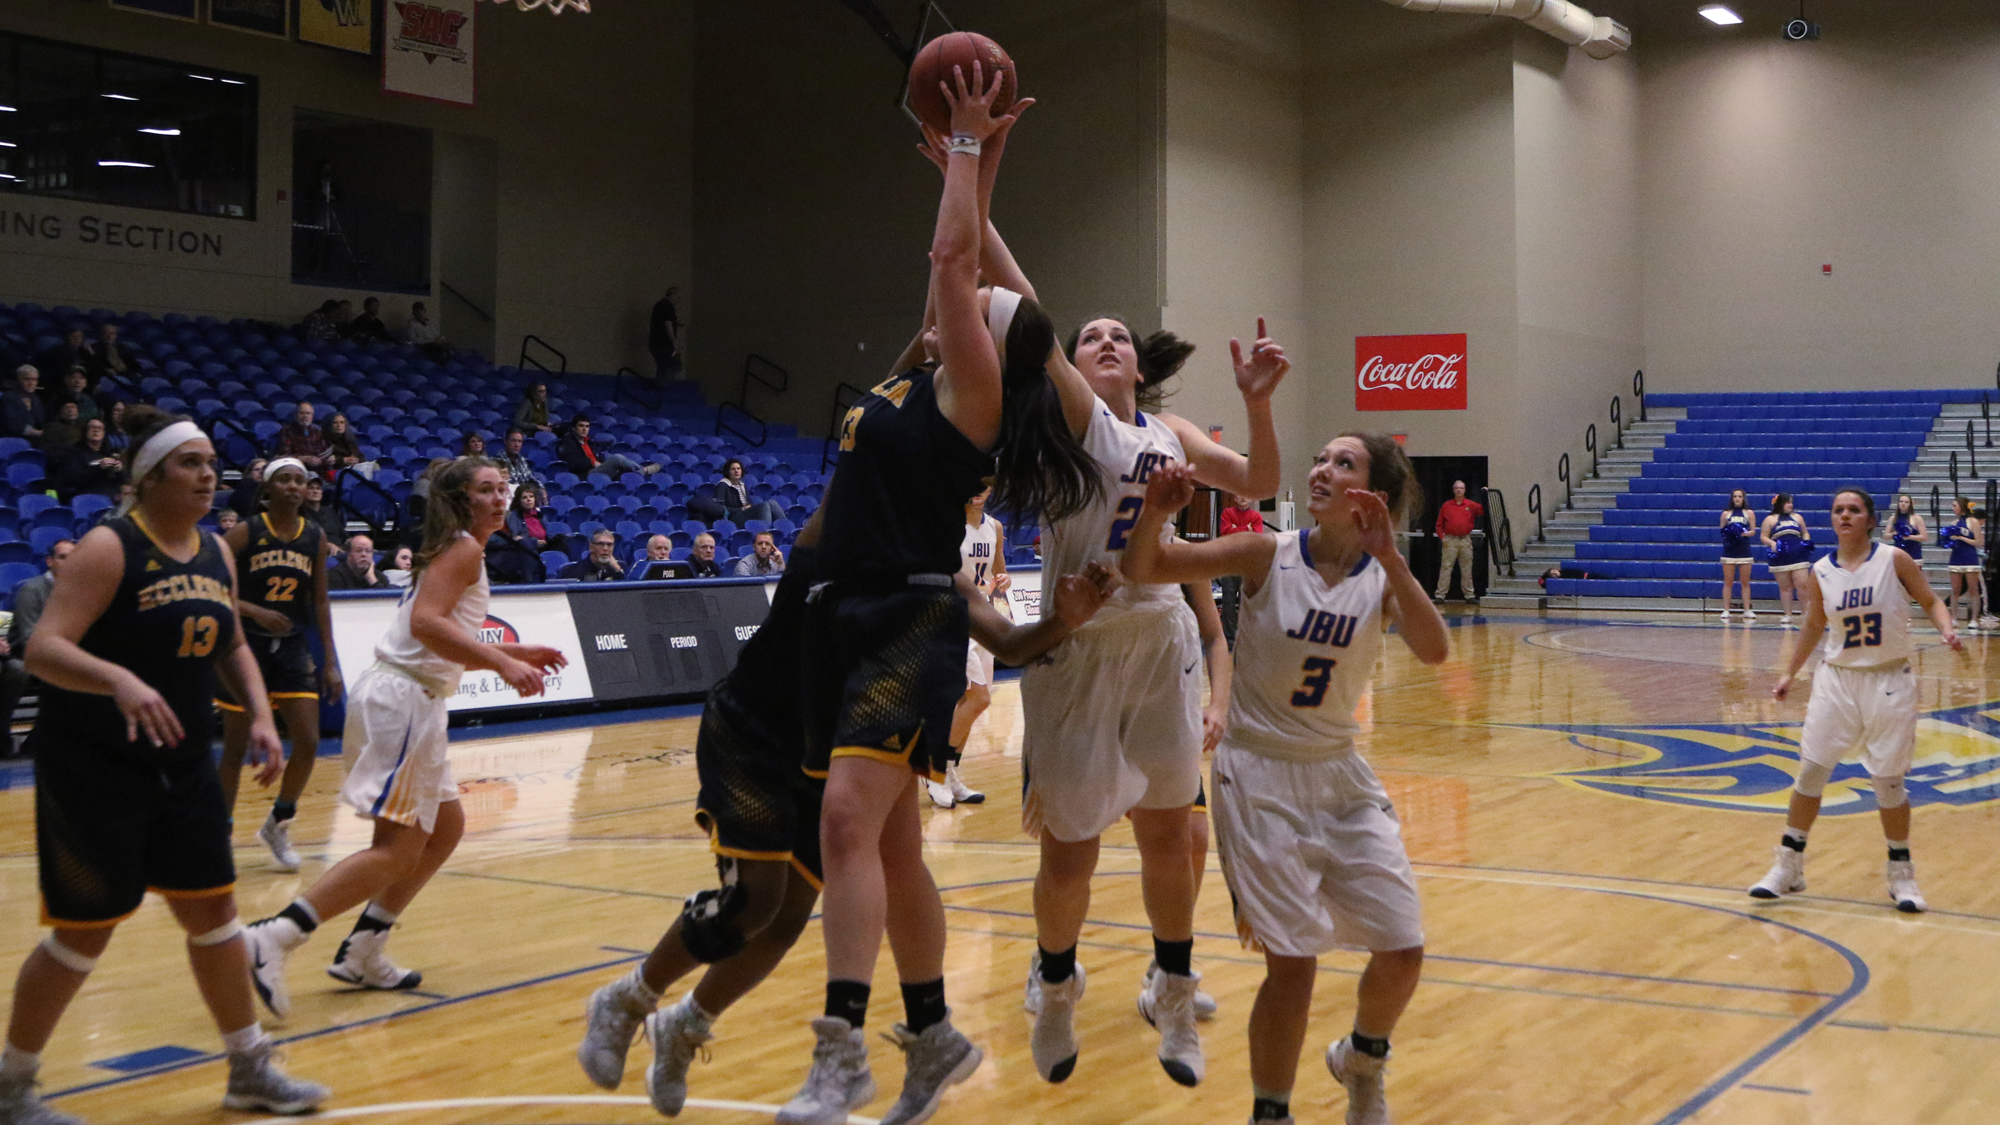 Scoring surge continues as women’s basketball tackles Ecclesia